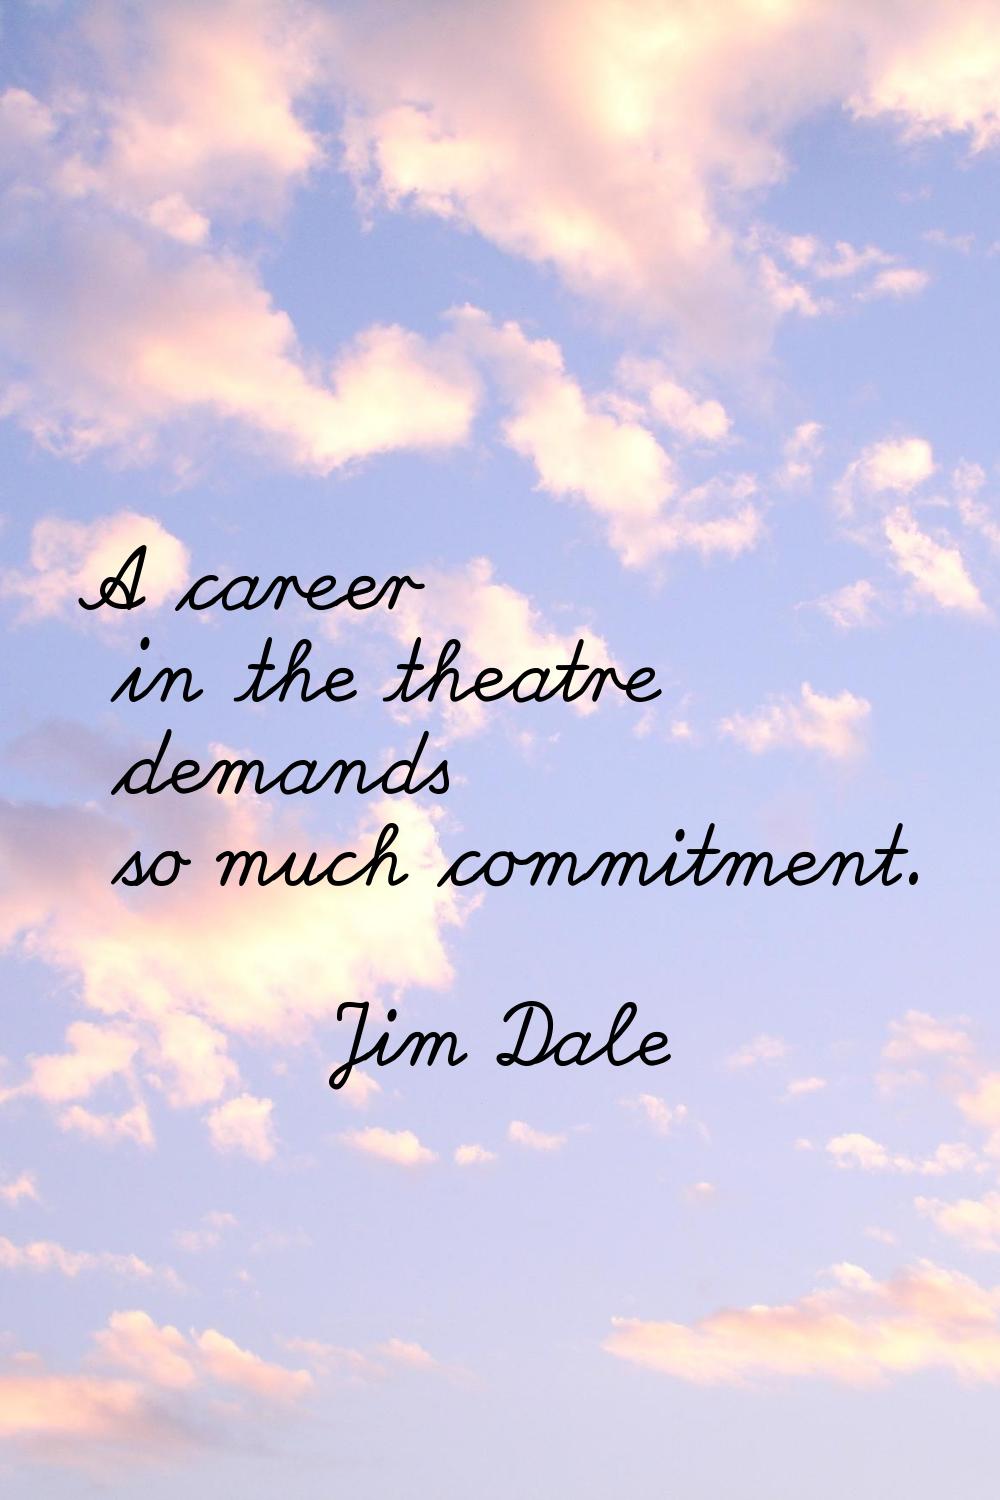 A career in the theatre demands so much commitment.